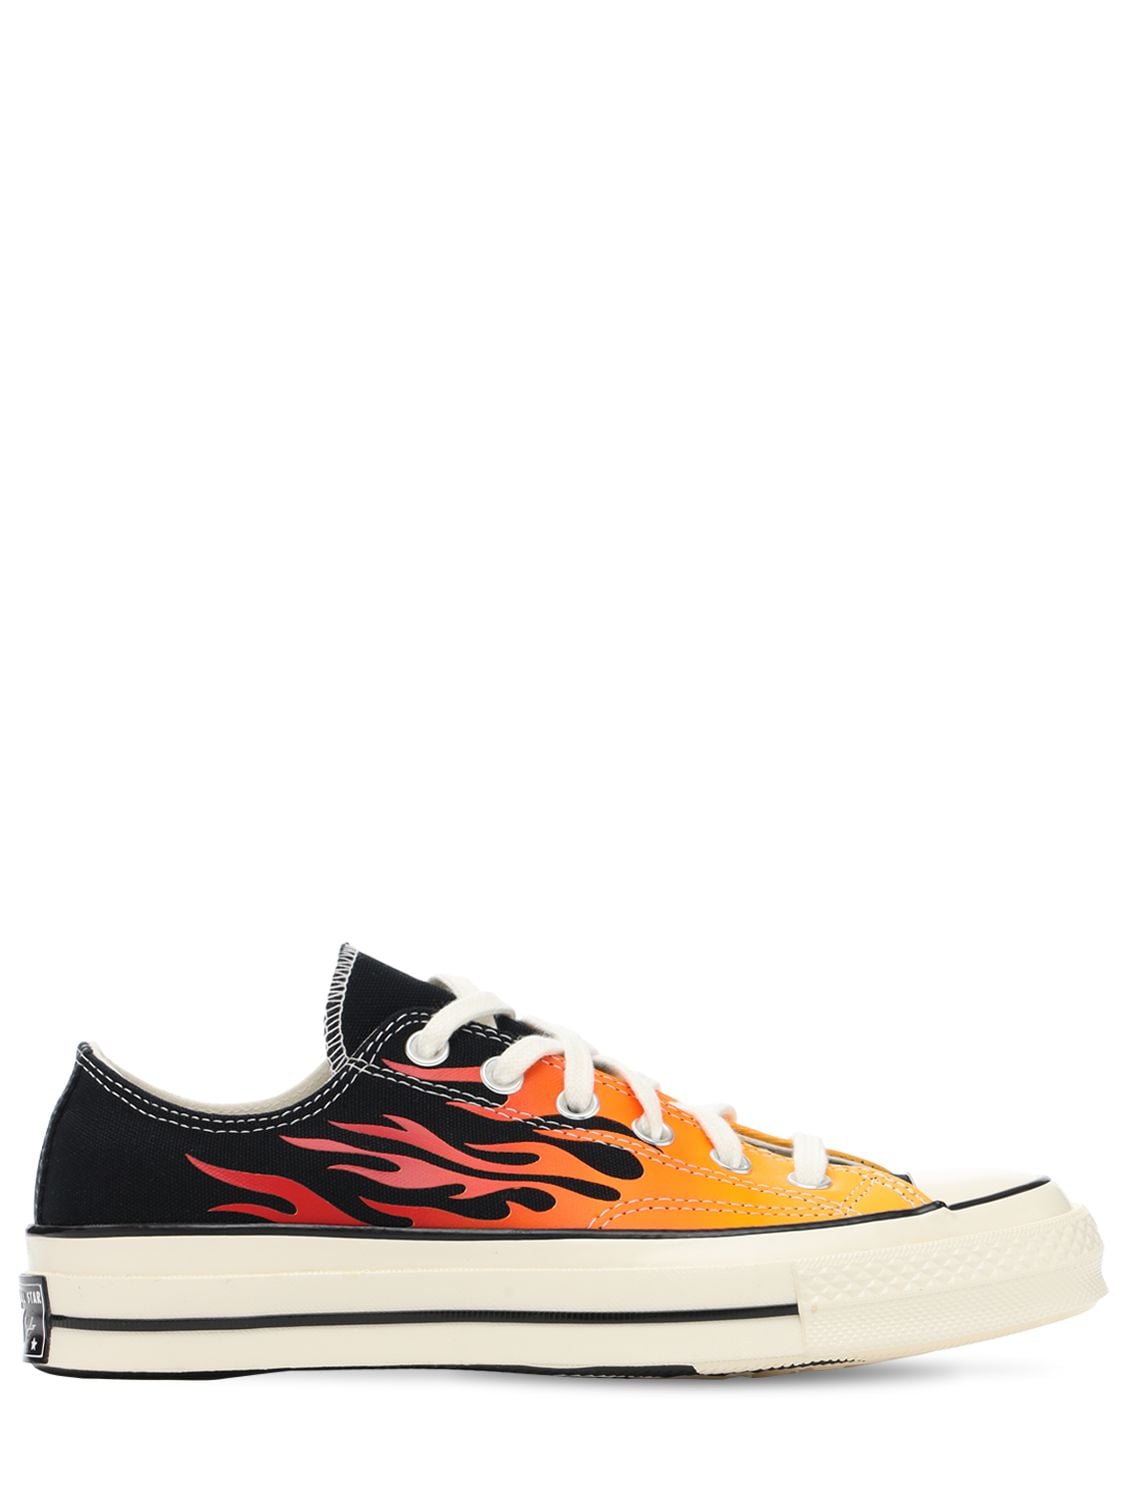 Image of Chuck 70 Flames Sneakers